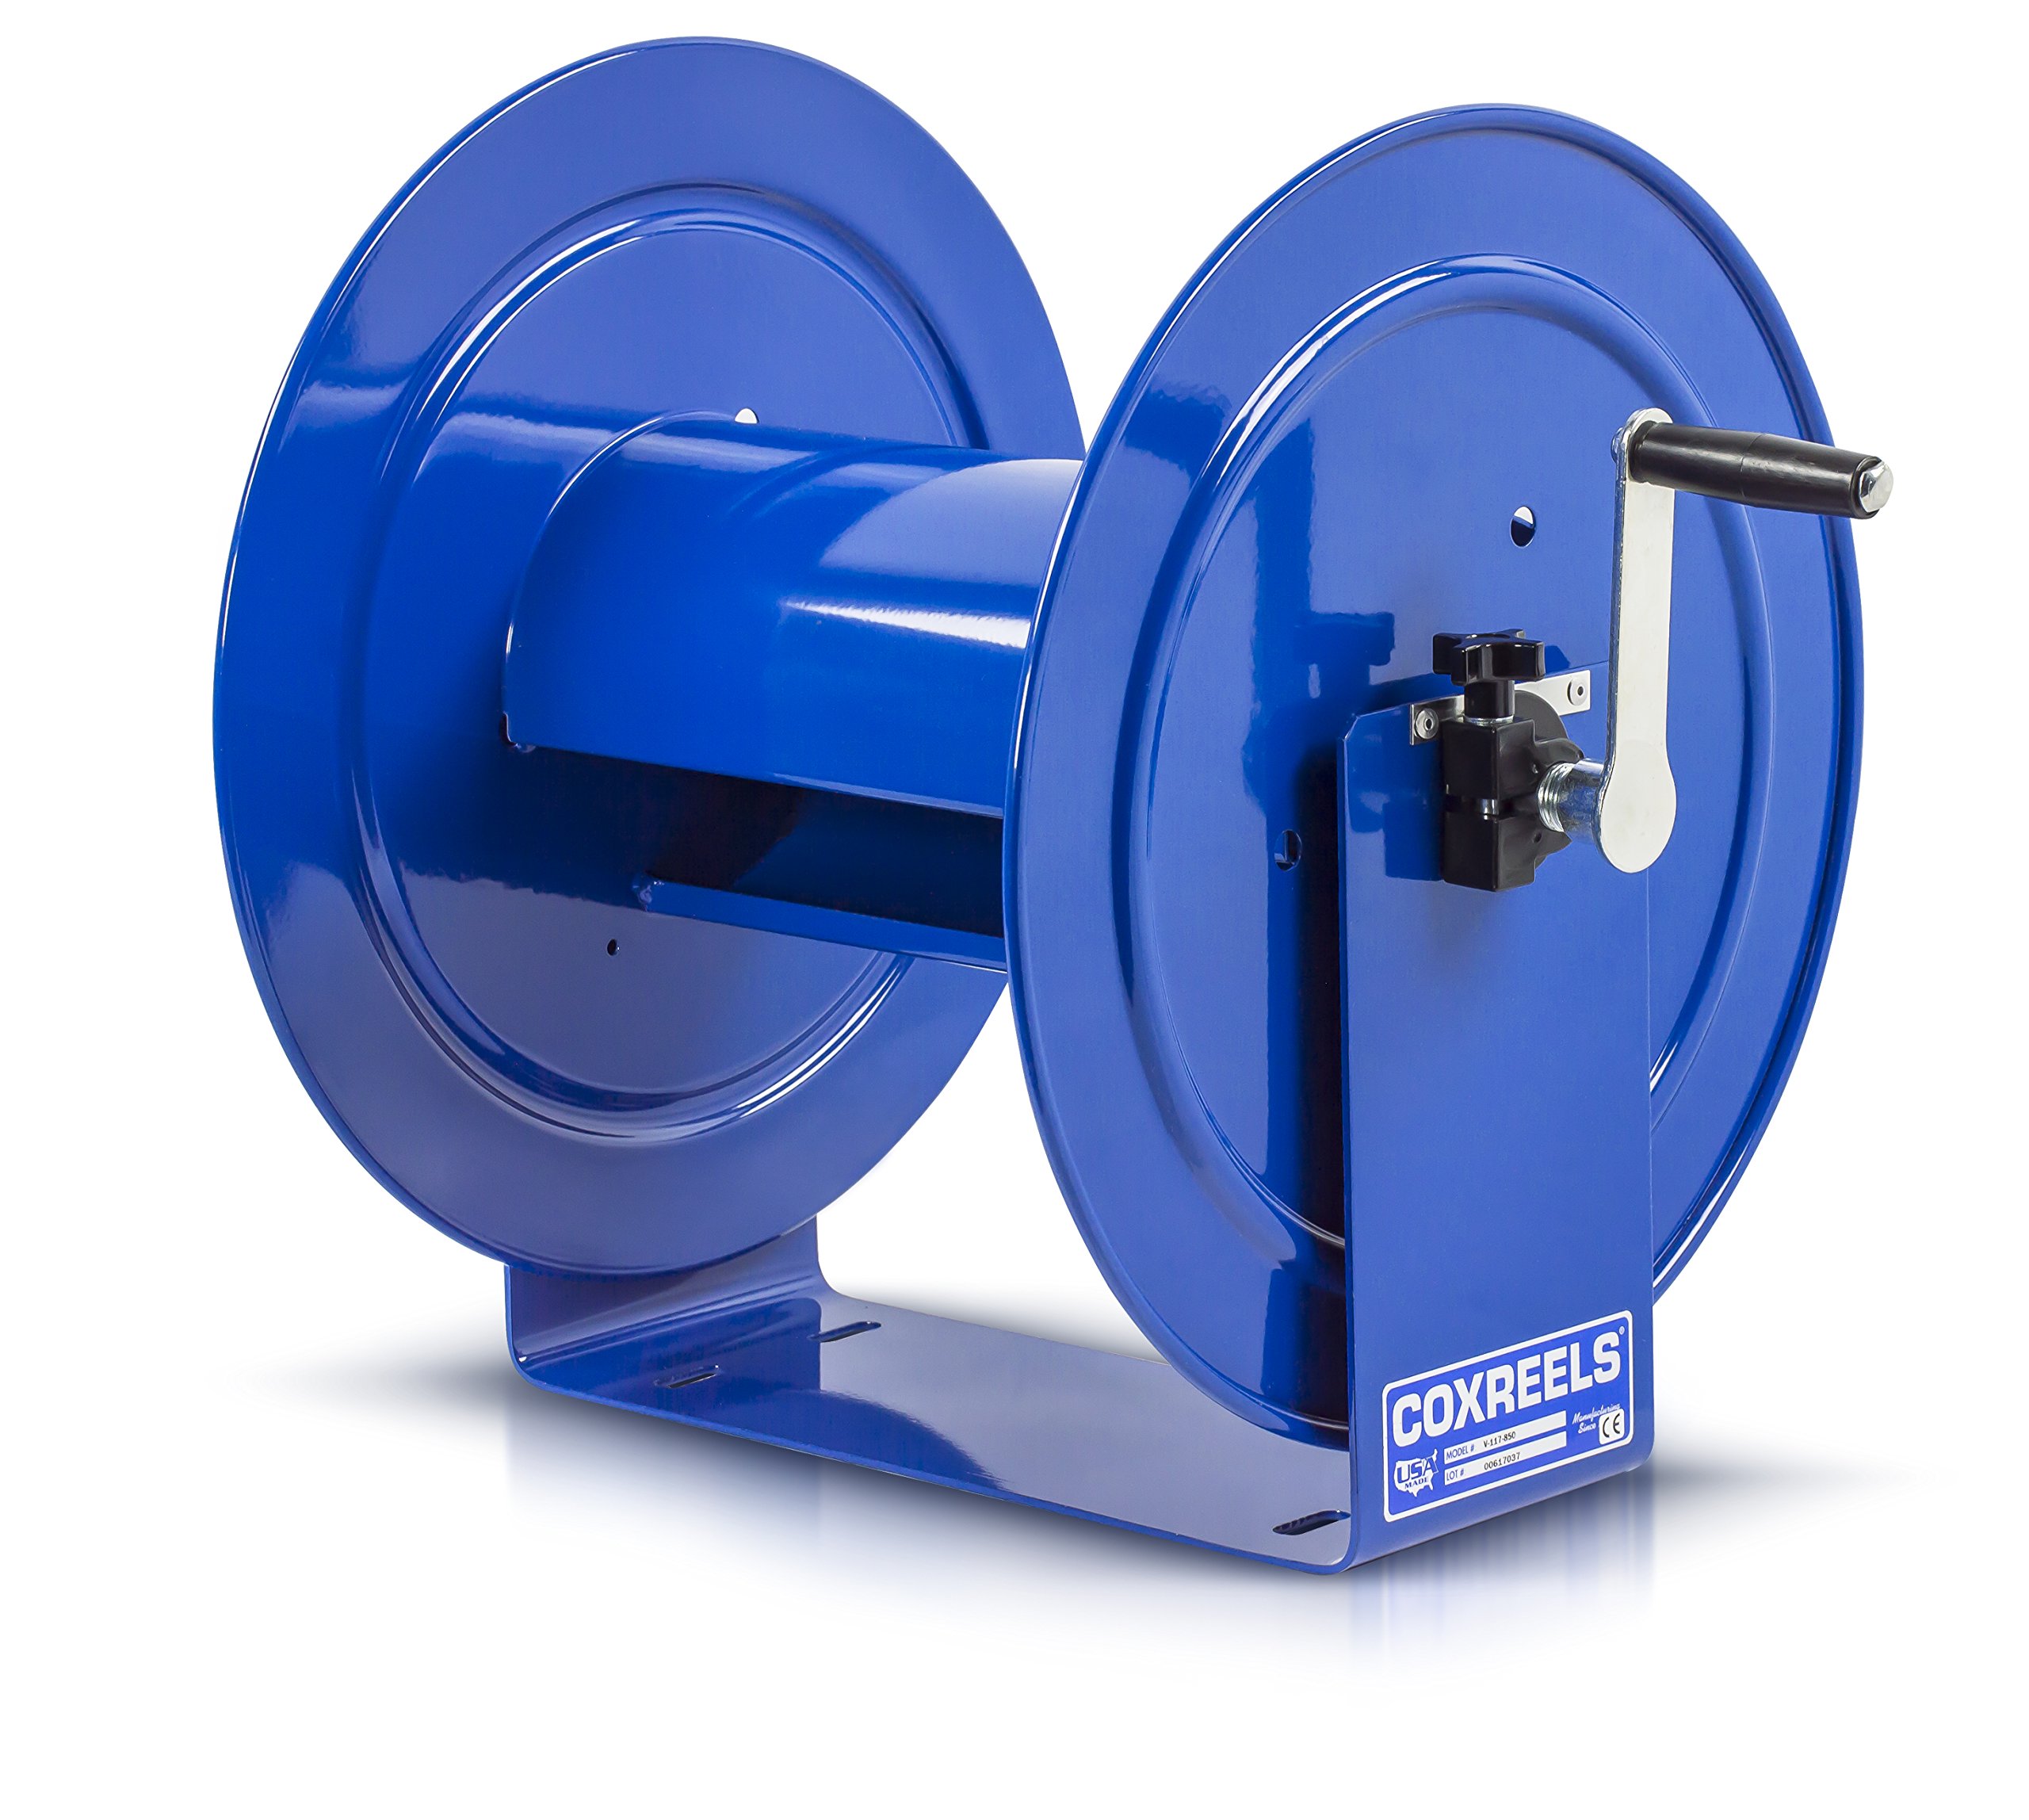 Coxreels V-117-850 Hand Crank Steel Hose Reel, V-100 Series, 1 ½” x 50’ – Easy to Use Compact Design – Heavy Duty Steel Construction, Made in the USA, Blue